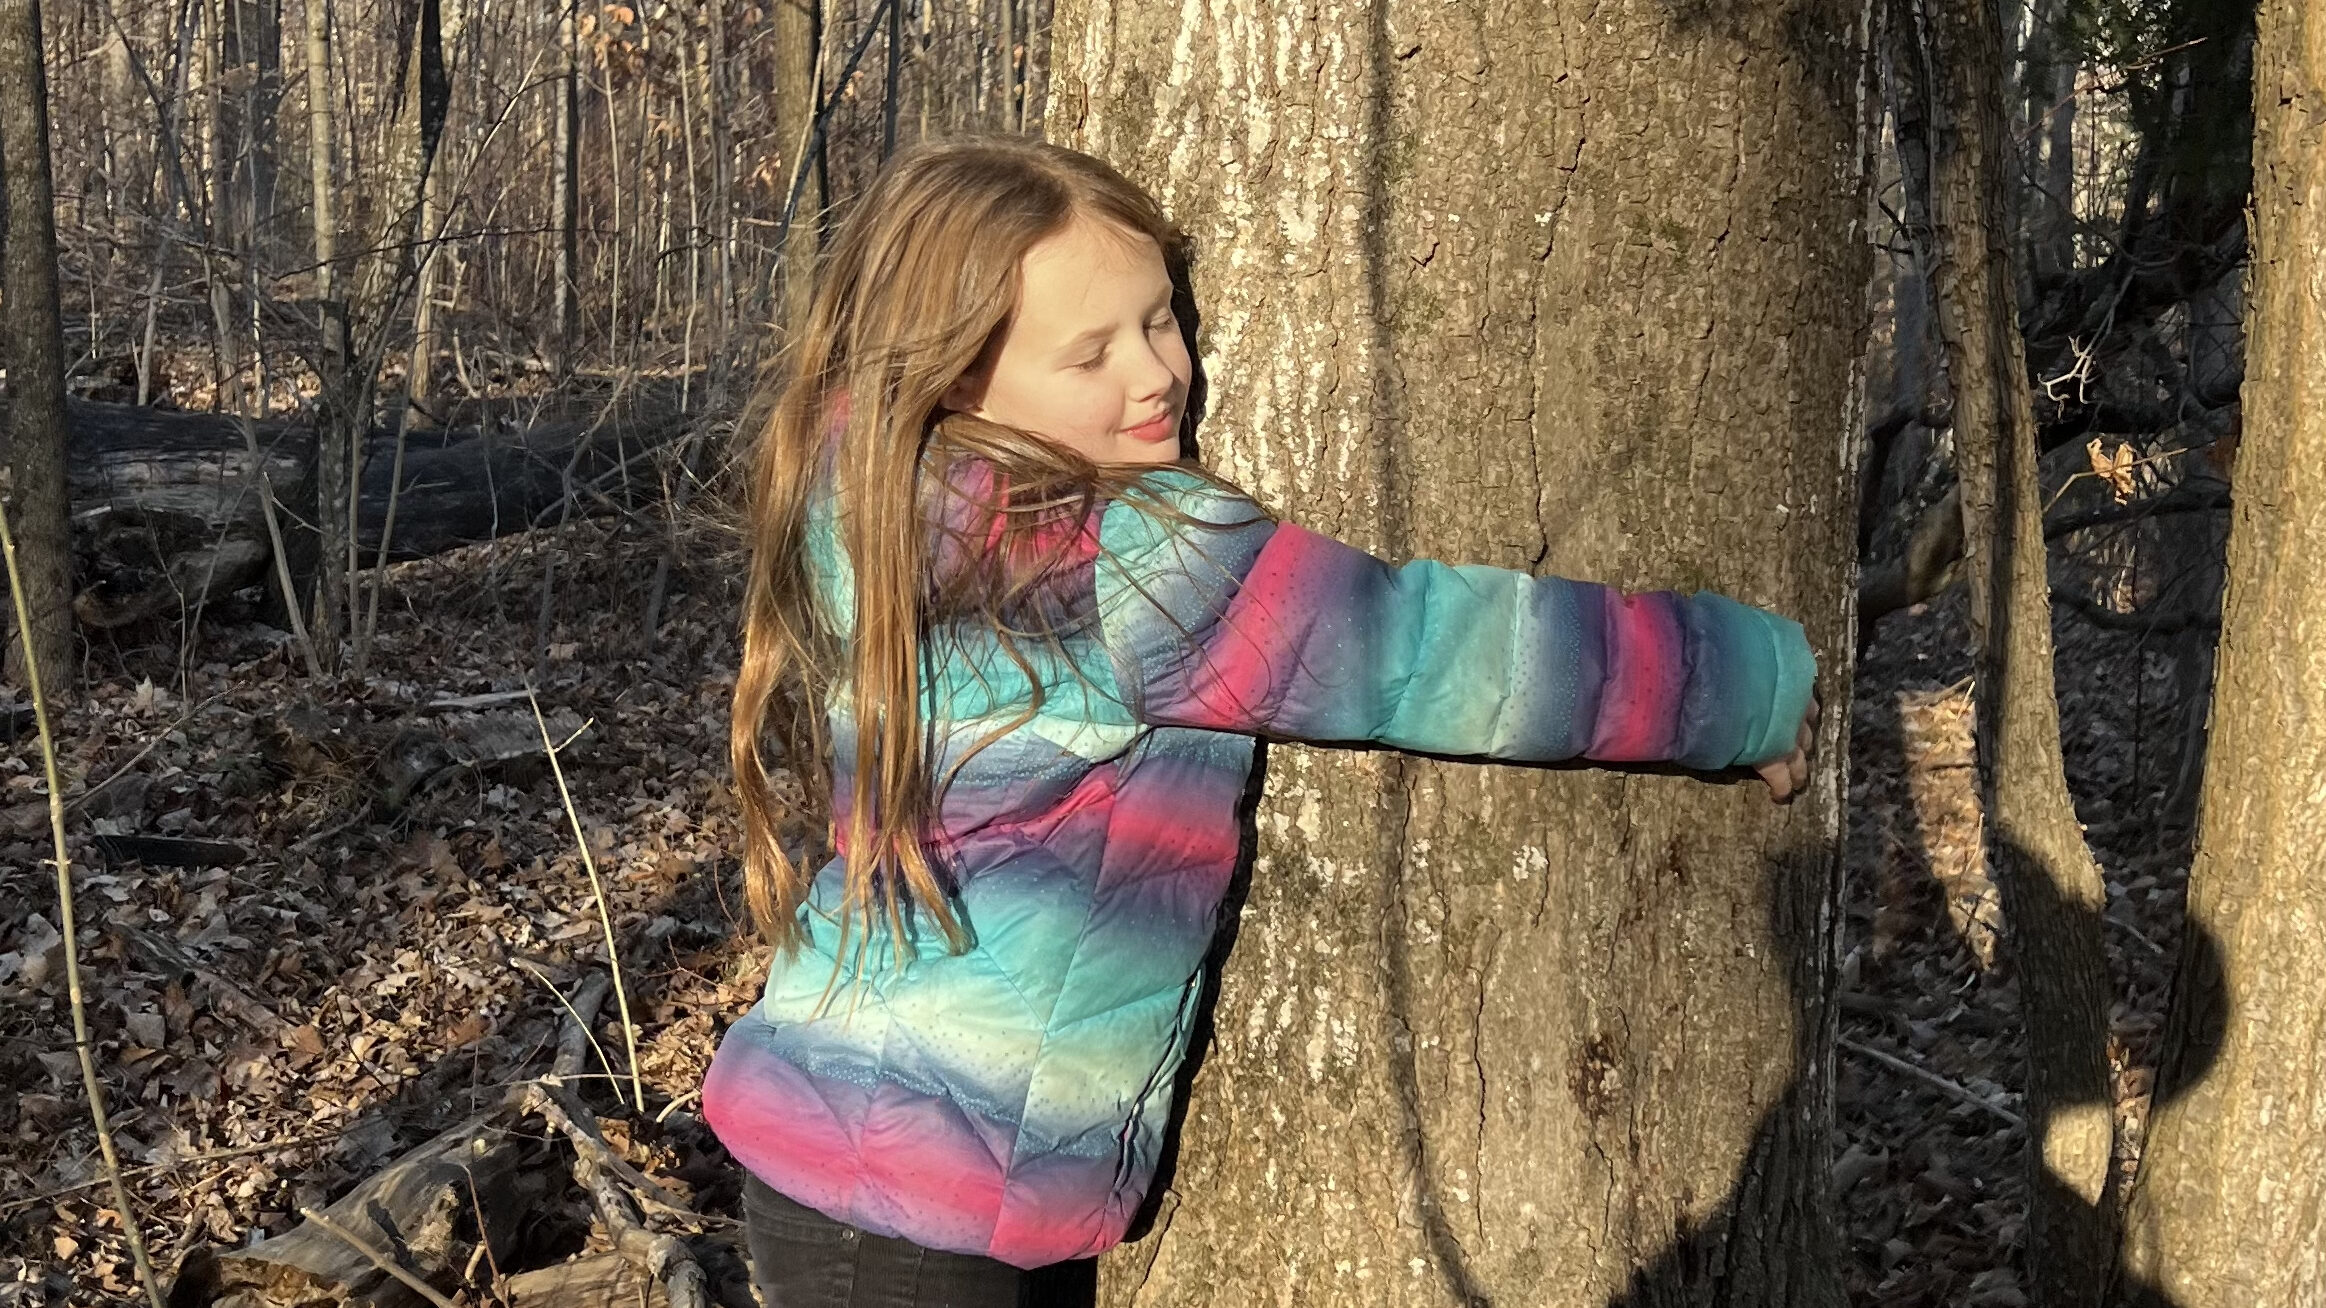 Child hugging one of the world's oldest sugar maple trees in Mark S. Burnham Provincial Park just east of Peterborough Ontario Canada